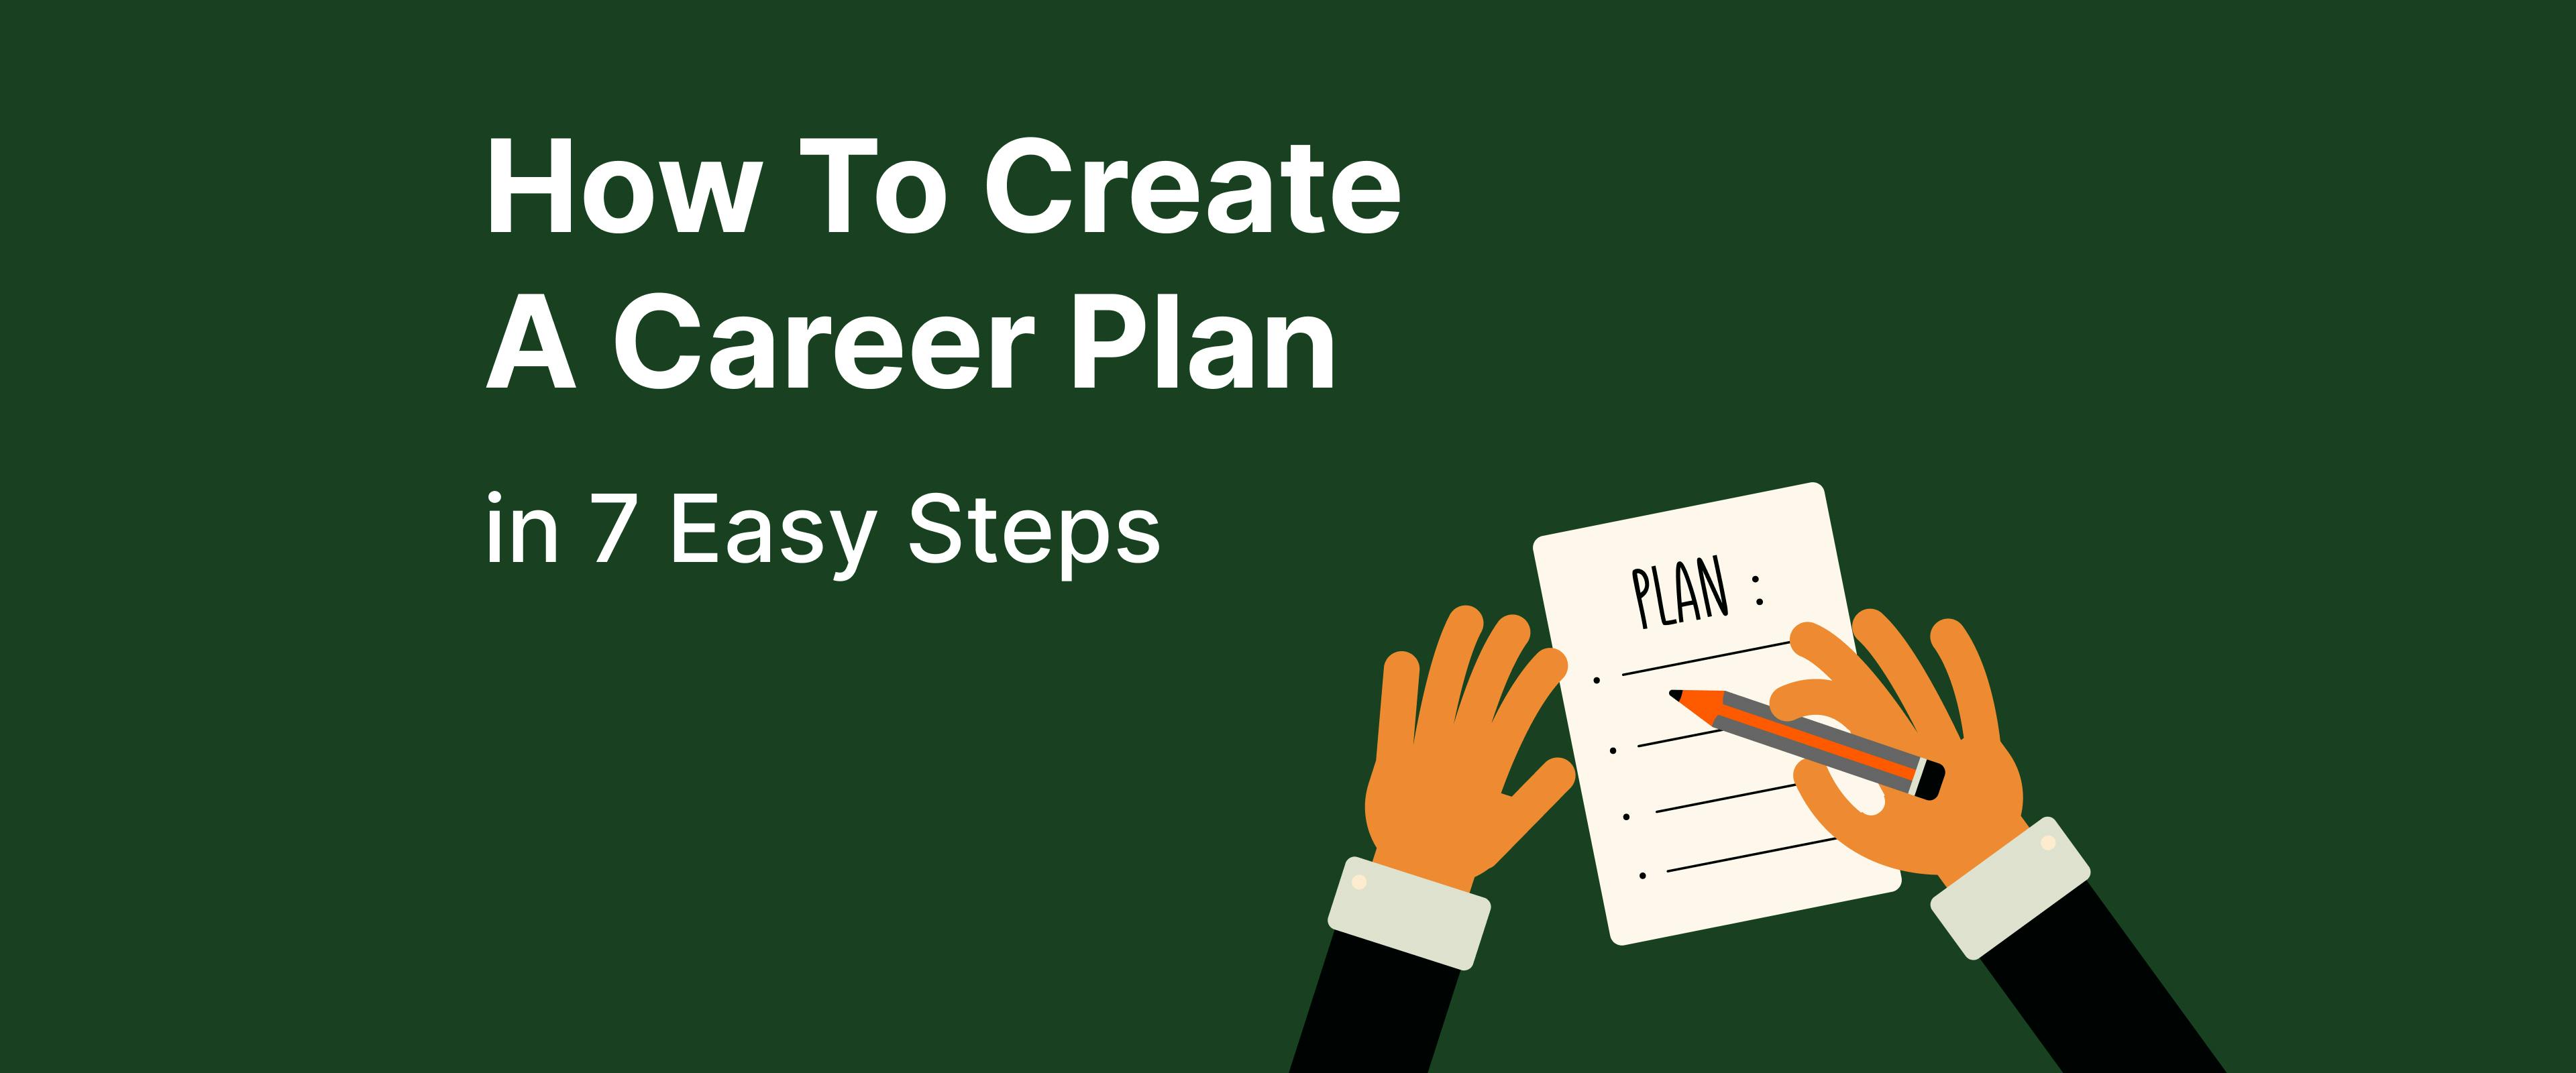 How To Create A Career Plan in 7 Easy Steps - Headway App